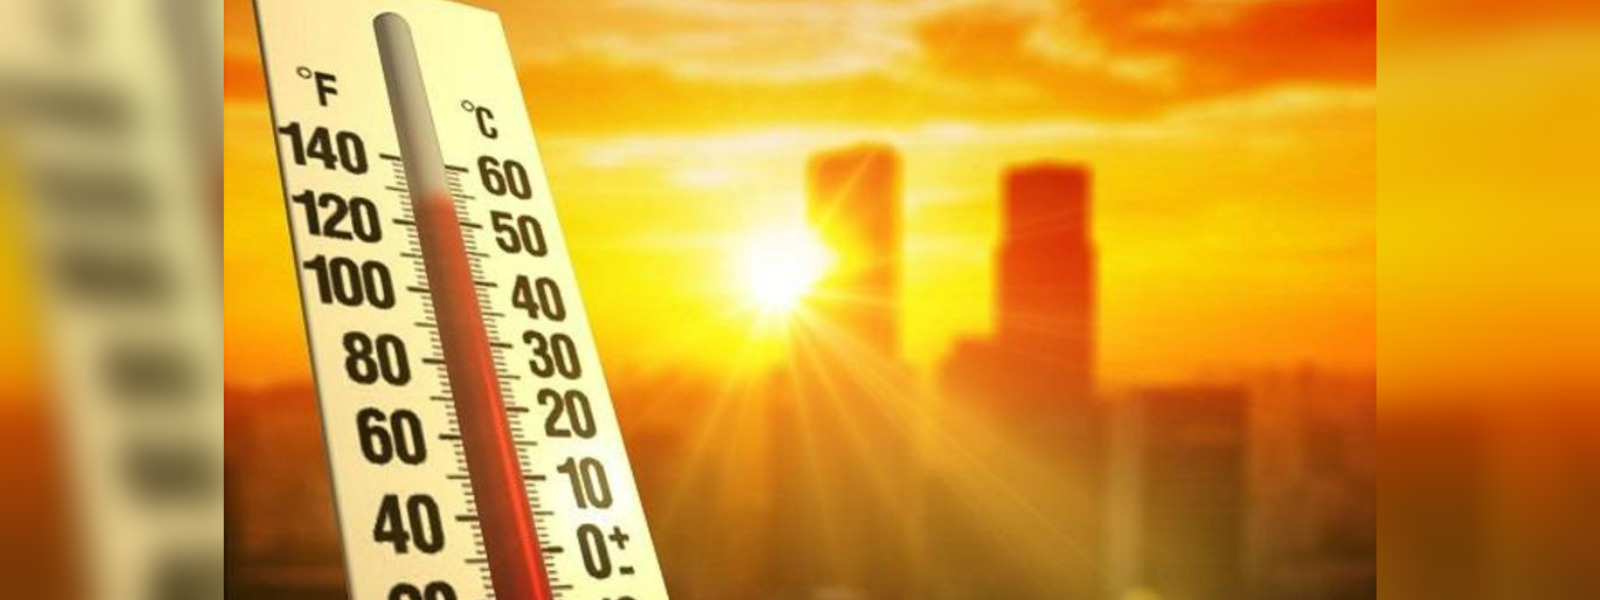 Met. Dept. issues "extreme caution" on heat level